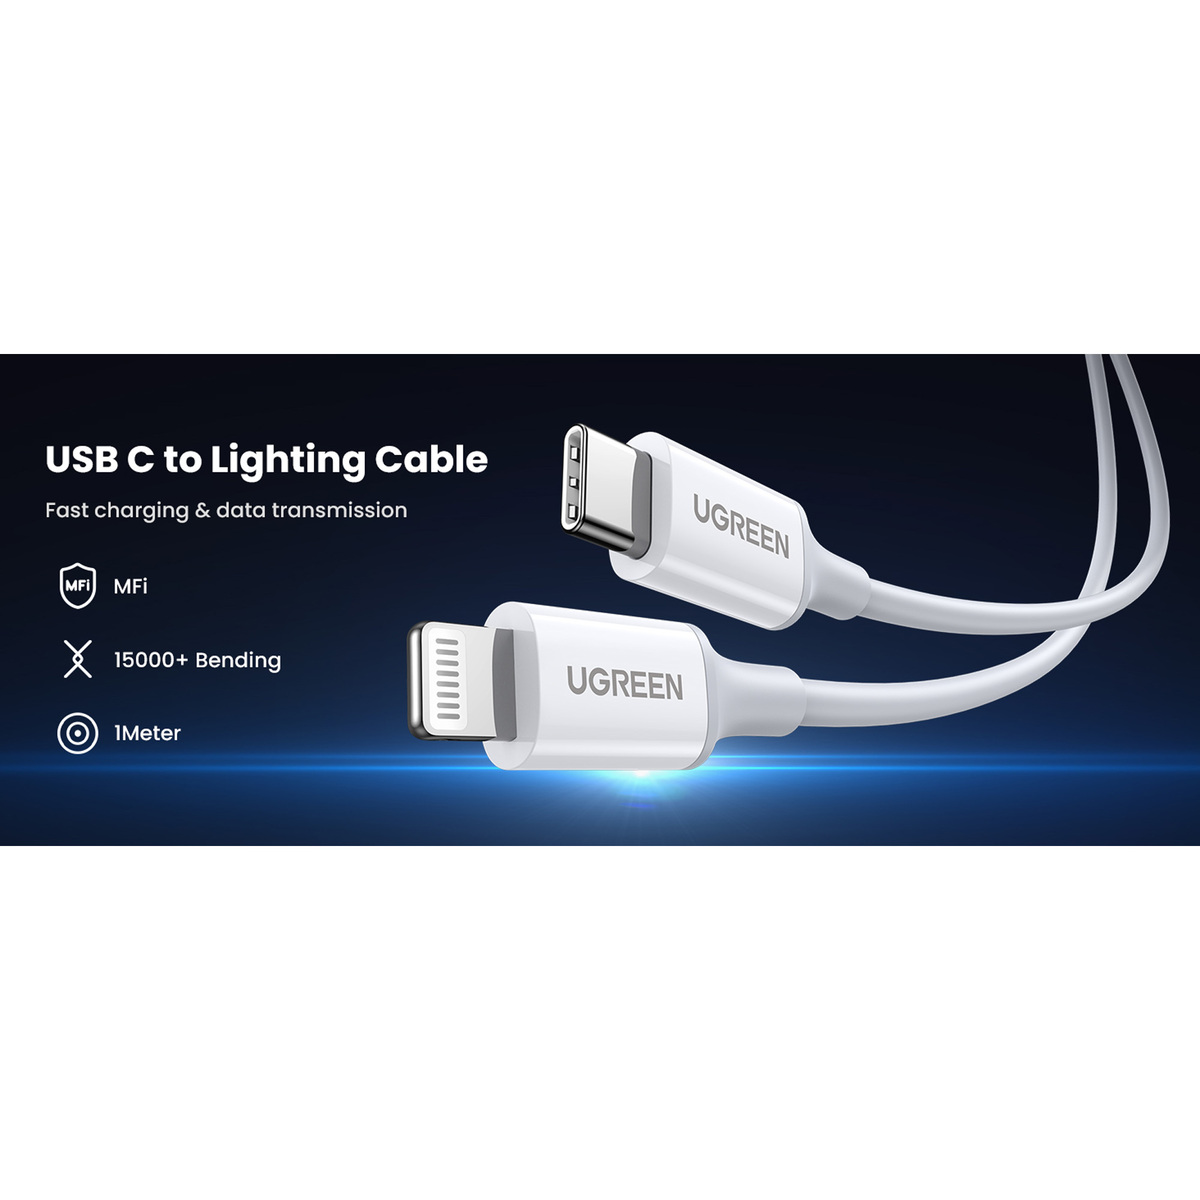 Ugreen USB-C PD Charger with Lightning Cable, 18 W, 70297